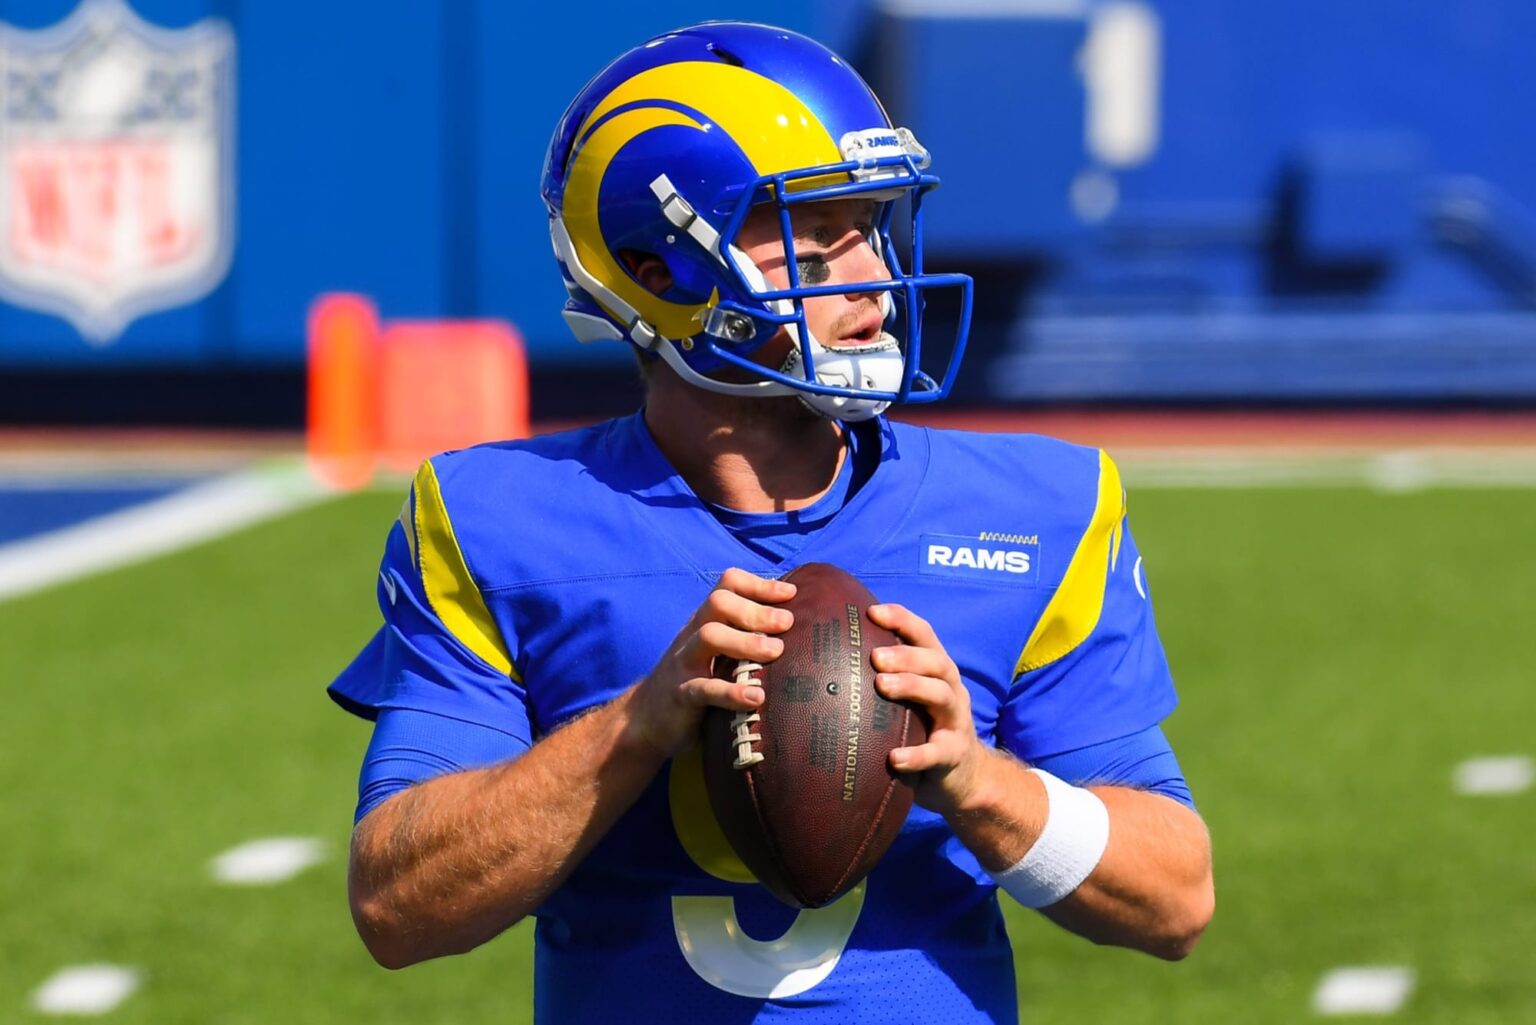 The Los Angeles Rams are counting on their backup QB to take them to the playoffs. Find out who it is and if he can lead the Rams to victory.